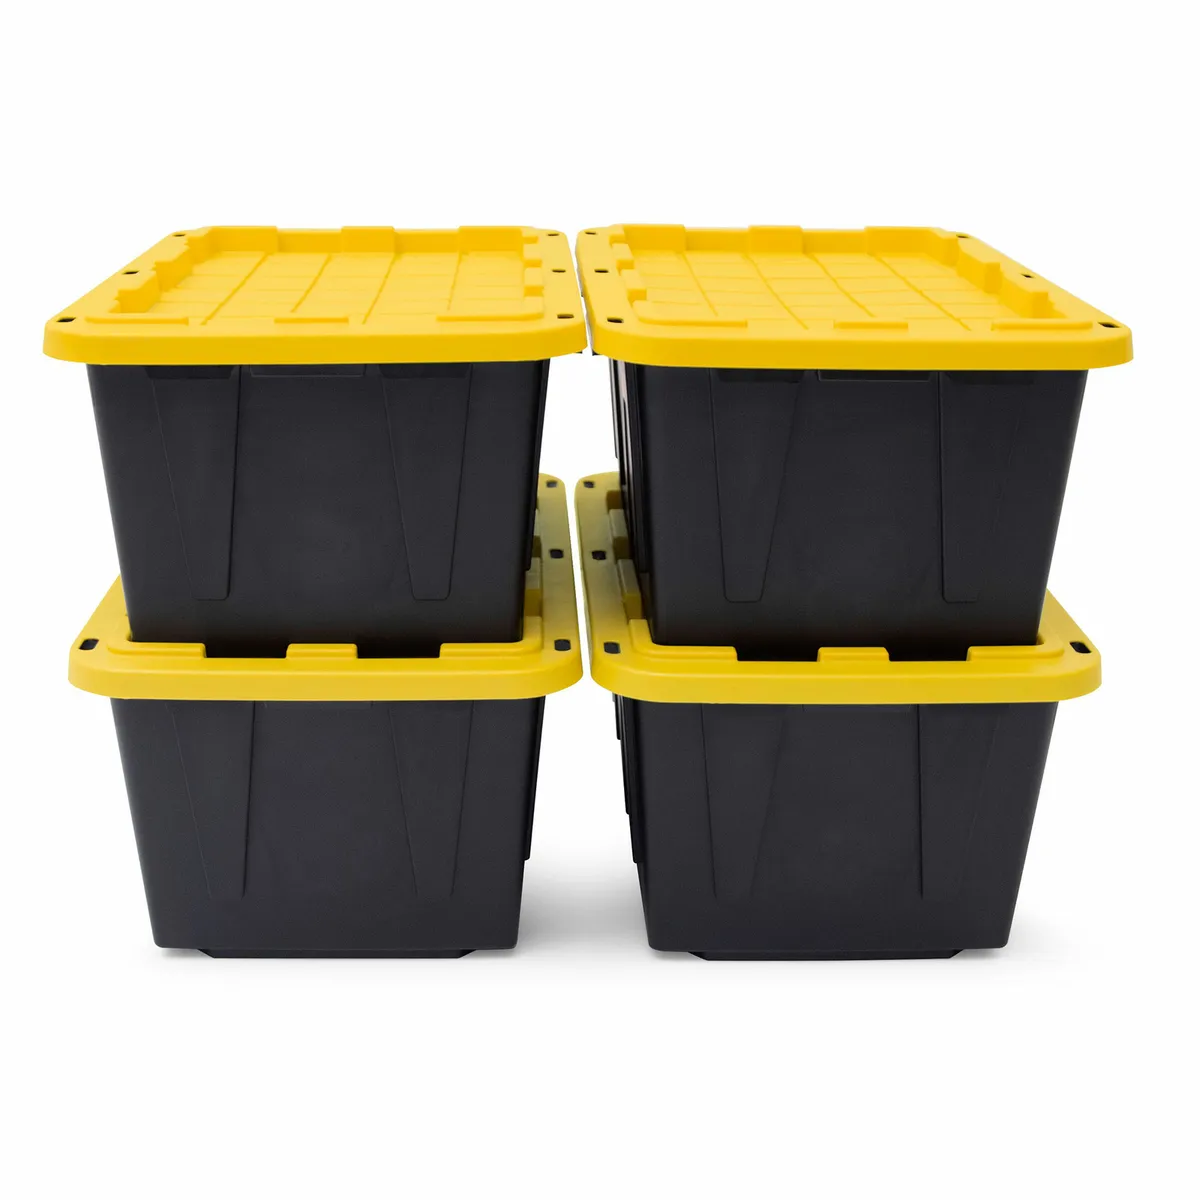 TOUGH BOX 27 Gallon Stackable Storage Totes with Lids, Black and